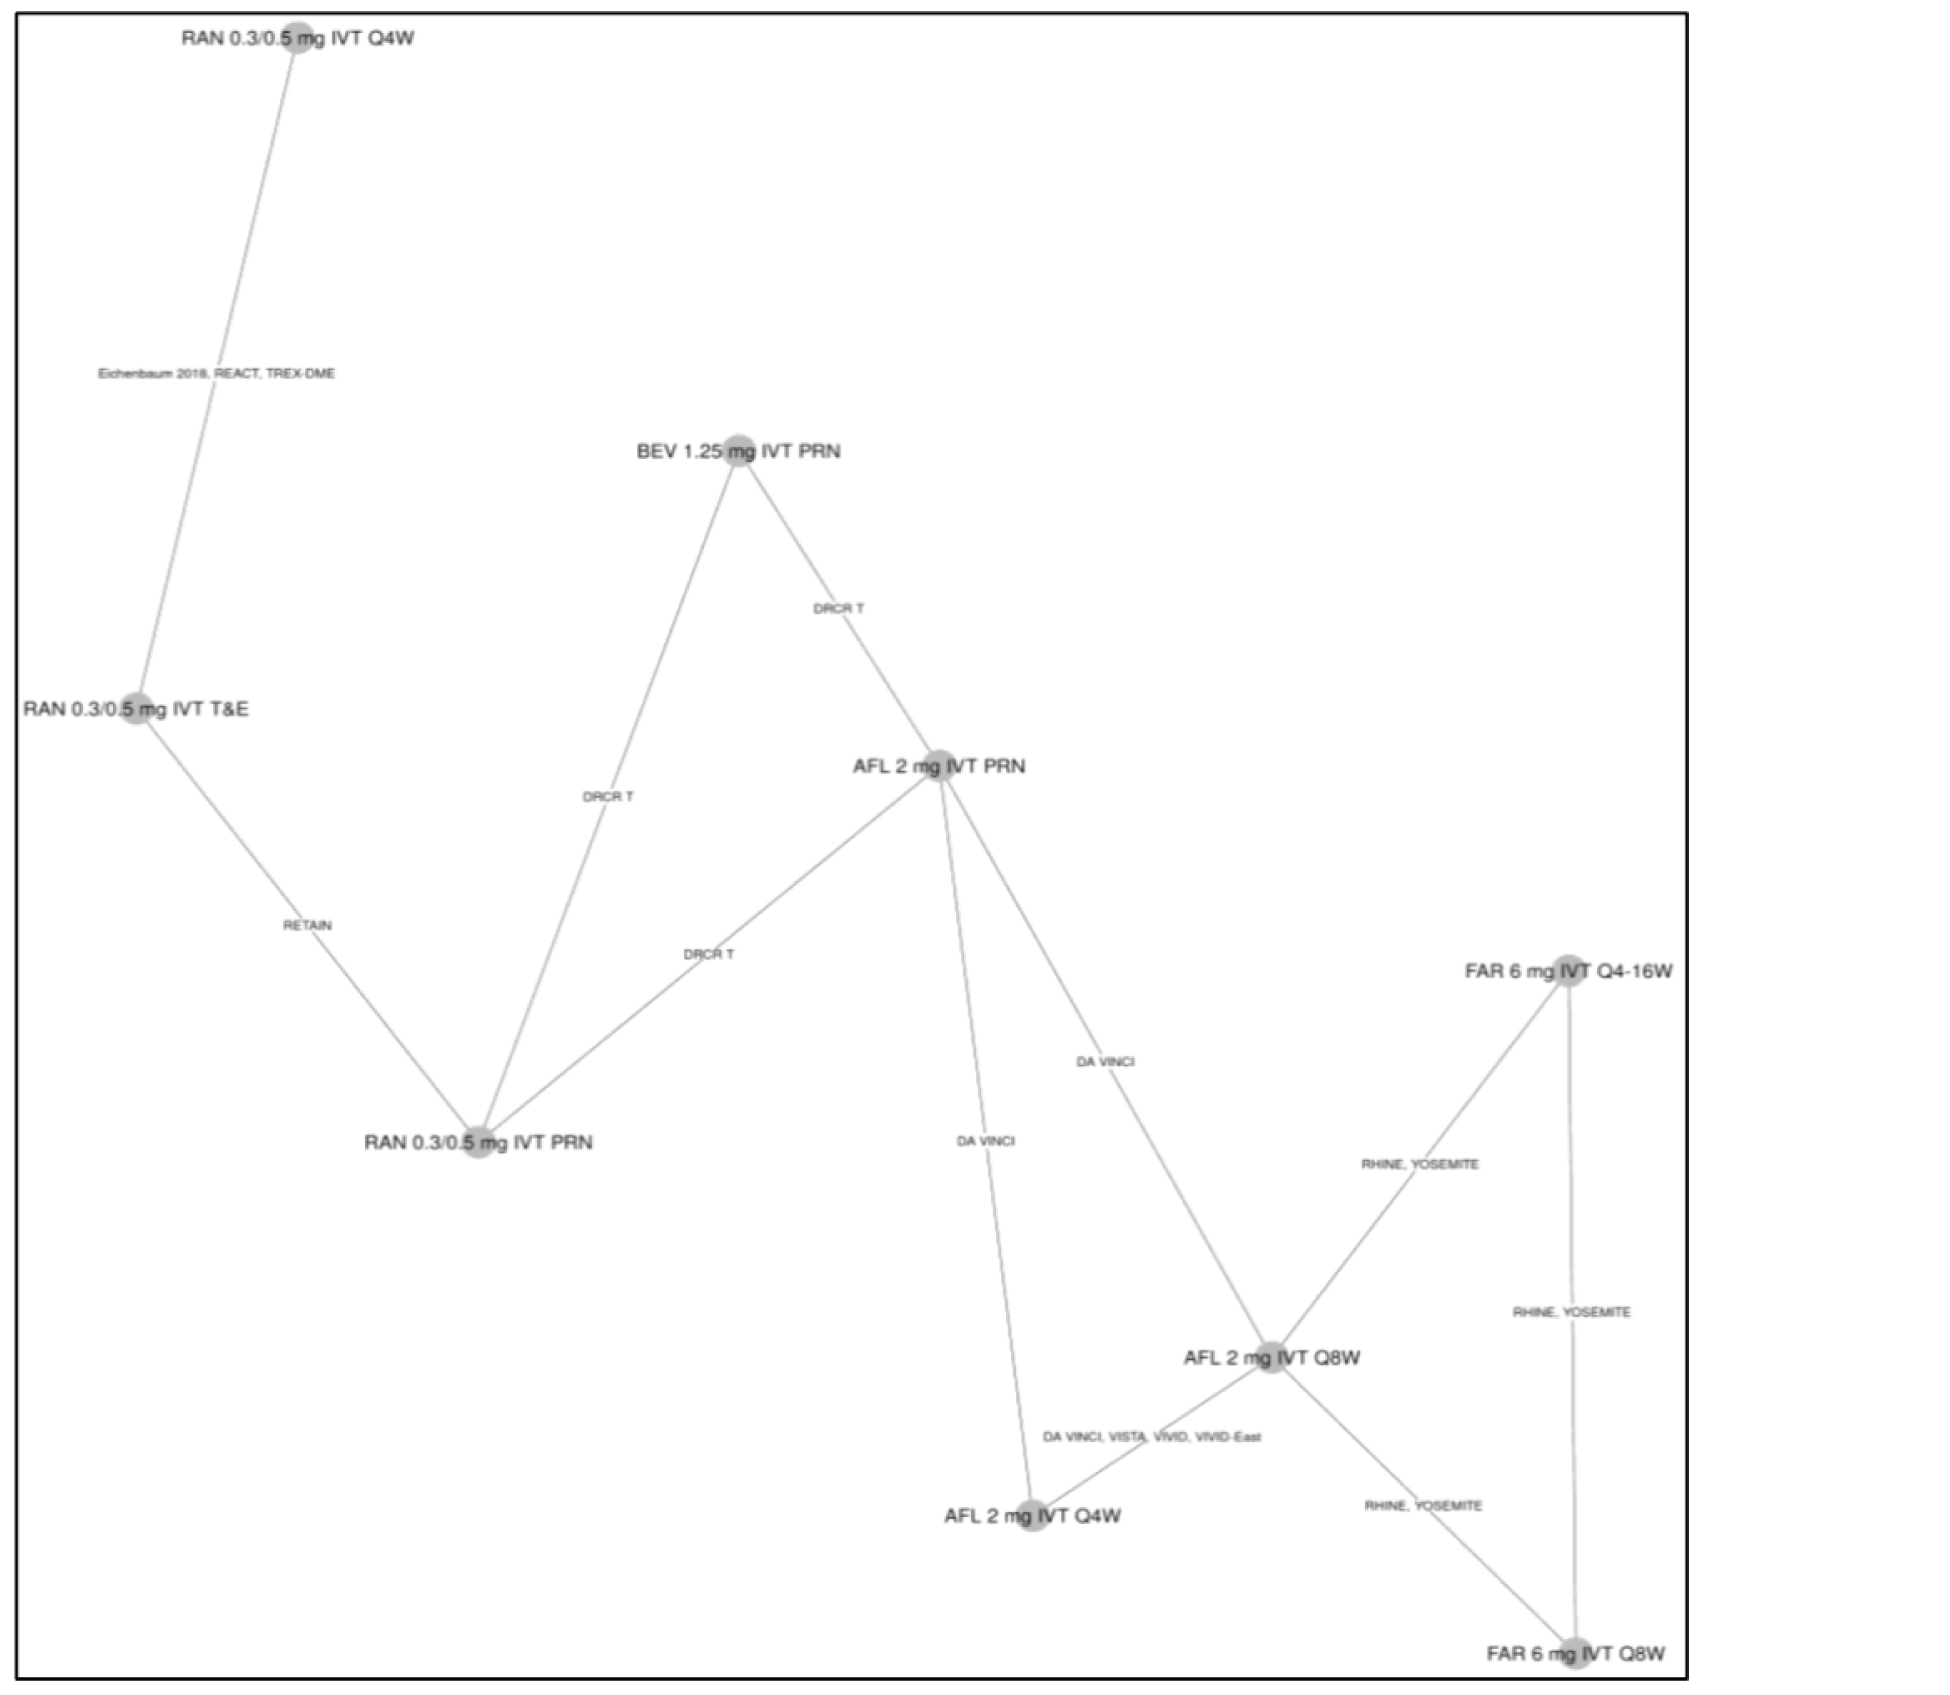 Eleven trials reported on the number of injections at 12 months and were connected in a network. There are 2 connected star diagrams with 4 more connections. Faricimab was connected to aflibercept through the RHINE and YOSEMITE trials.